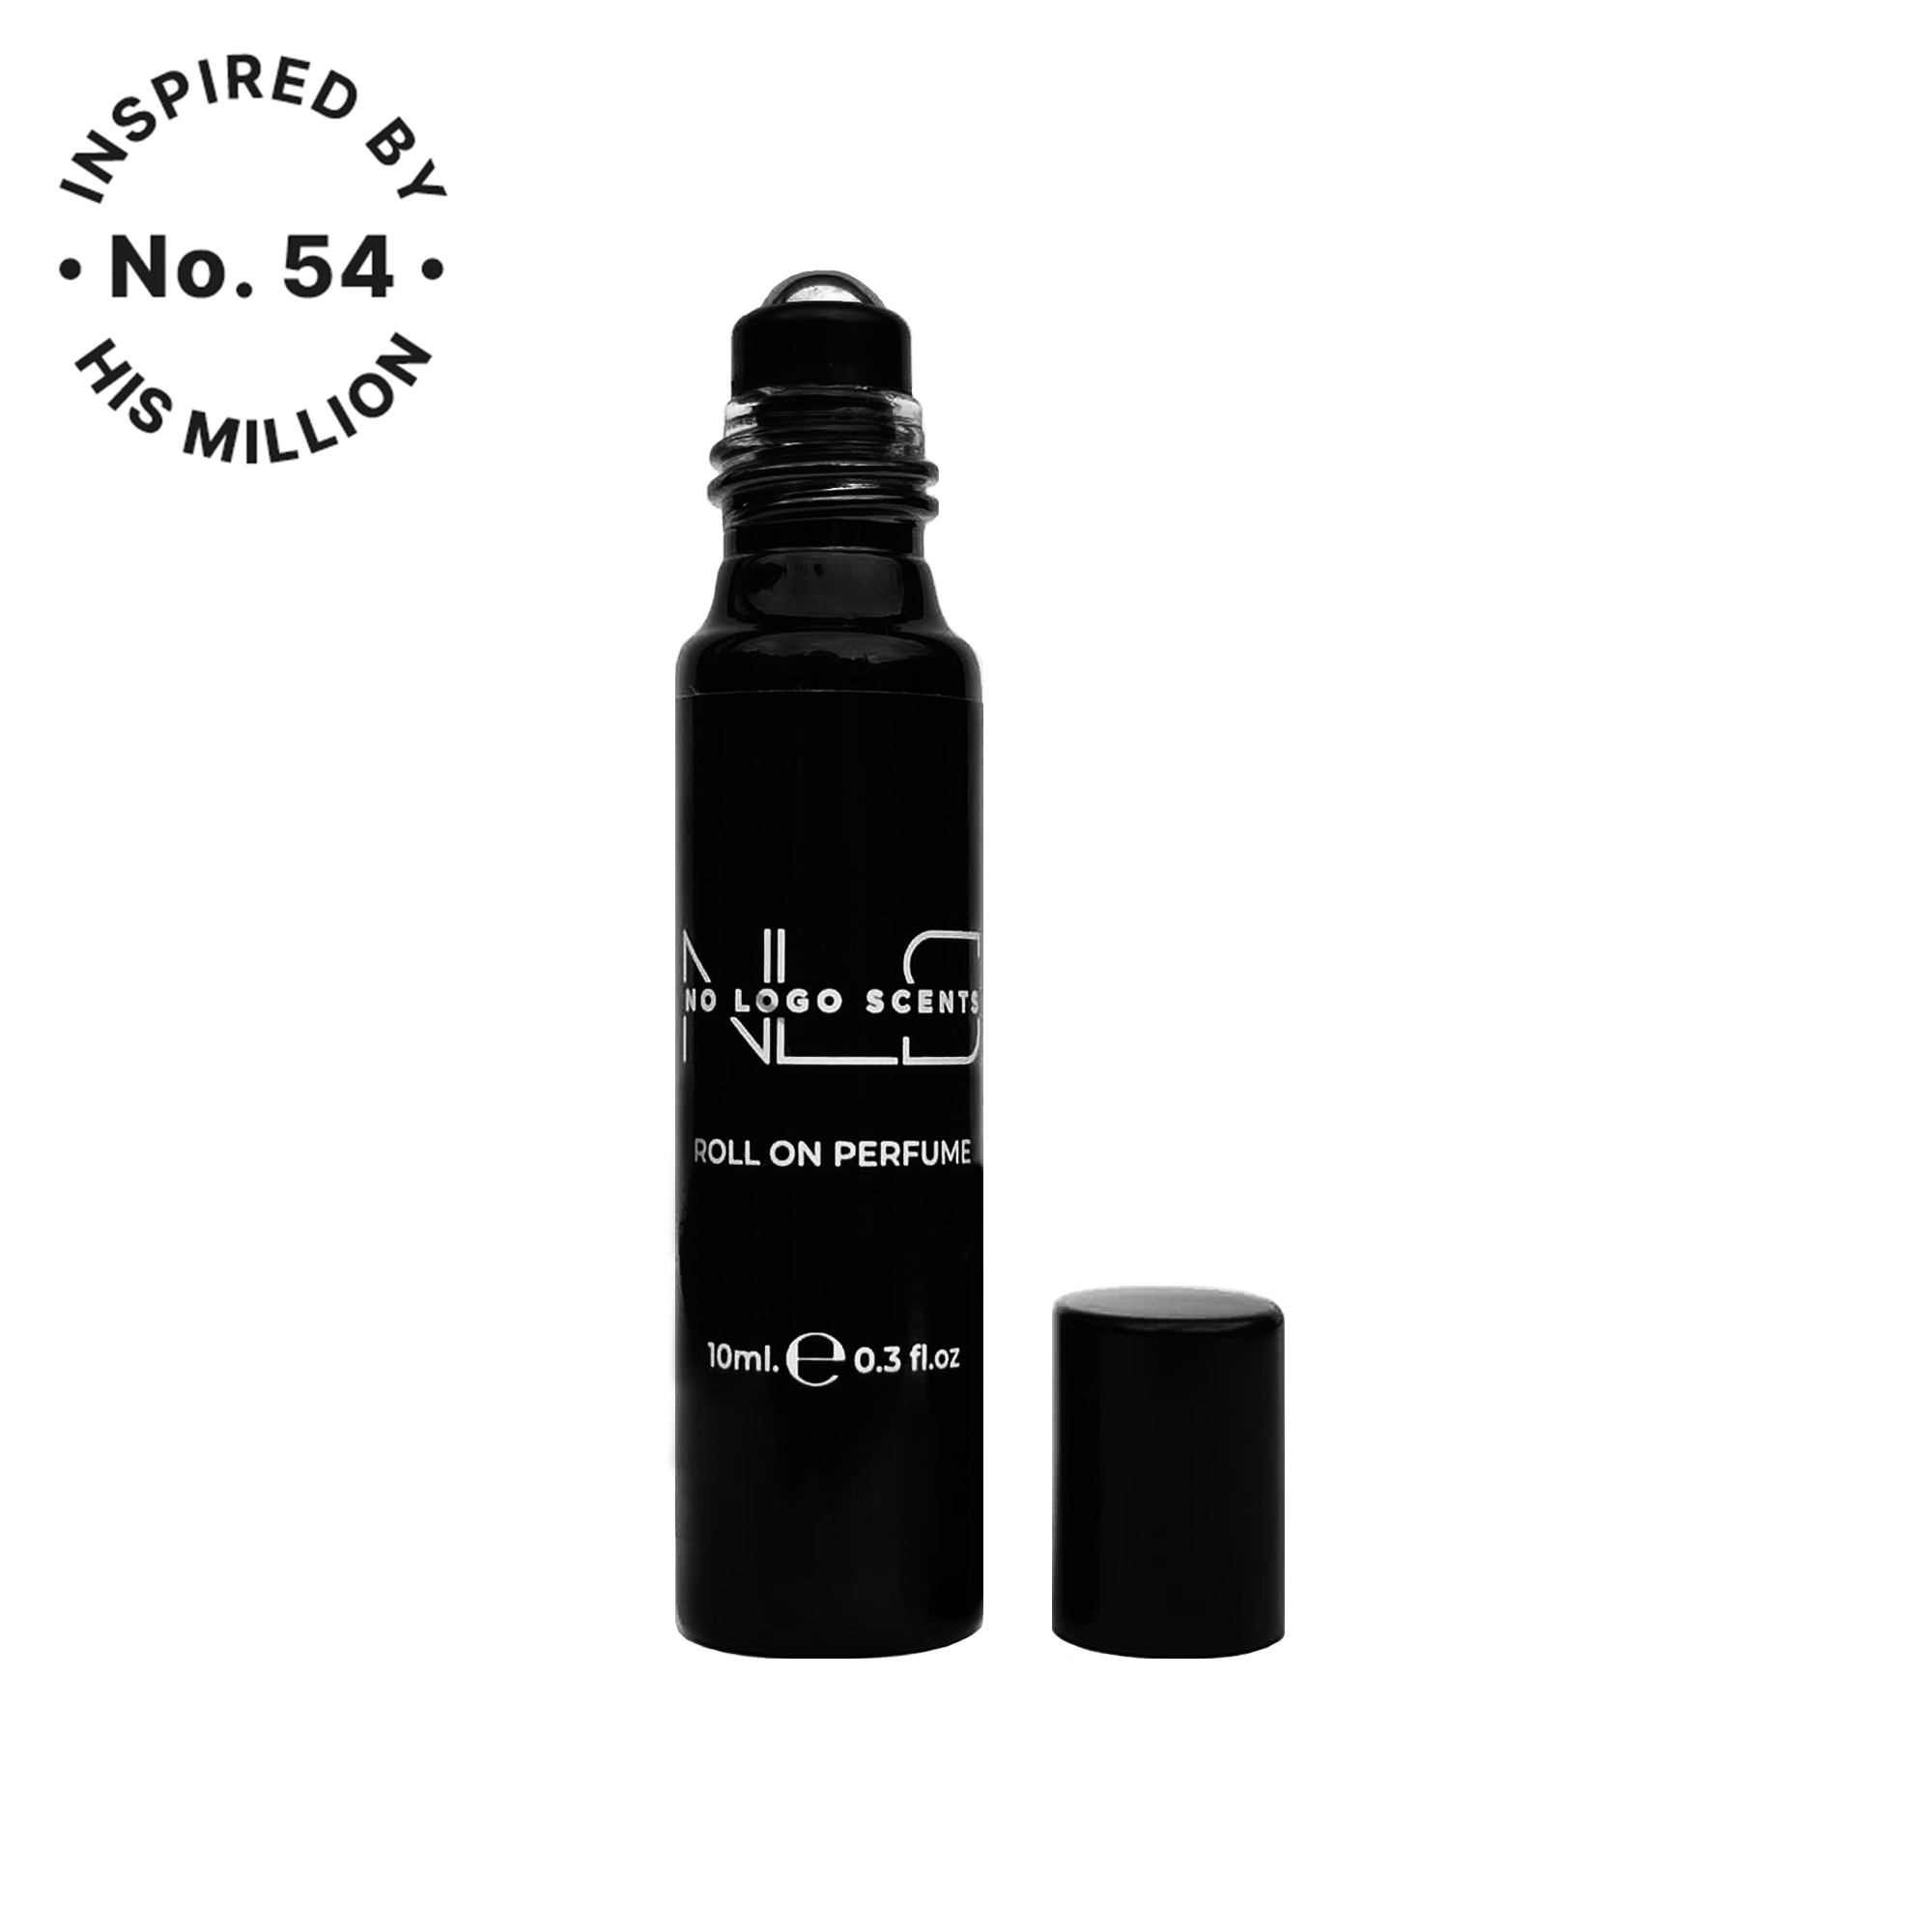 No.54 – INSPIRED BY HIS MILLION from category MEN’S ROLL ON PERFUMES - 1